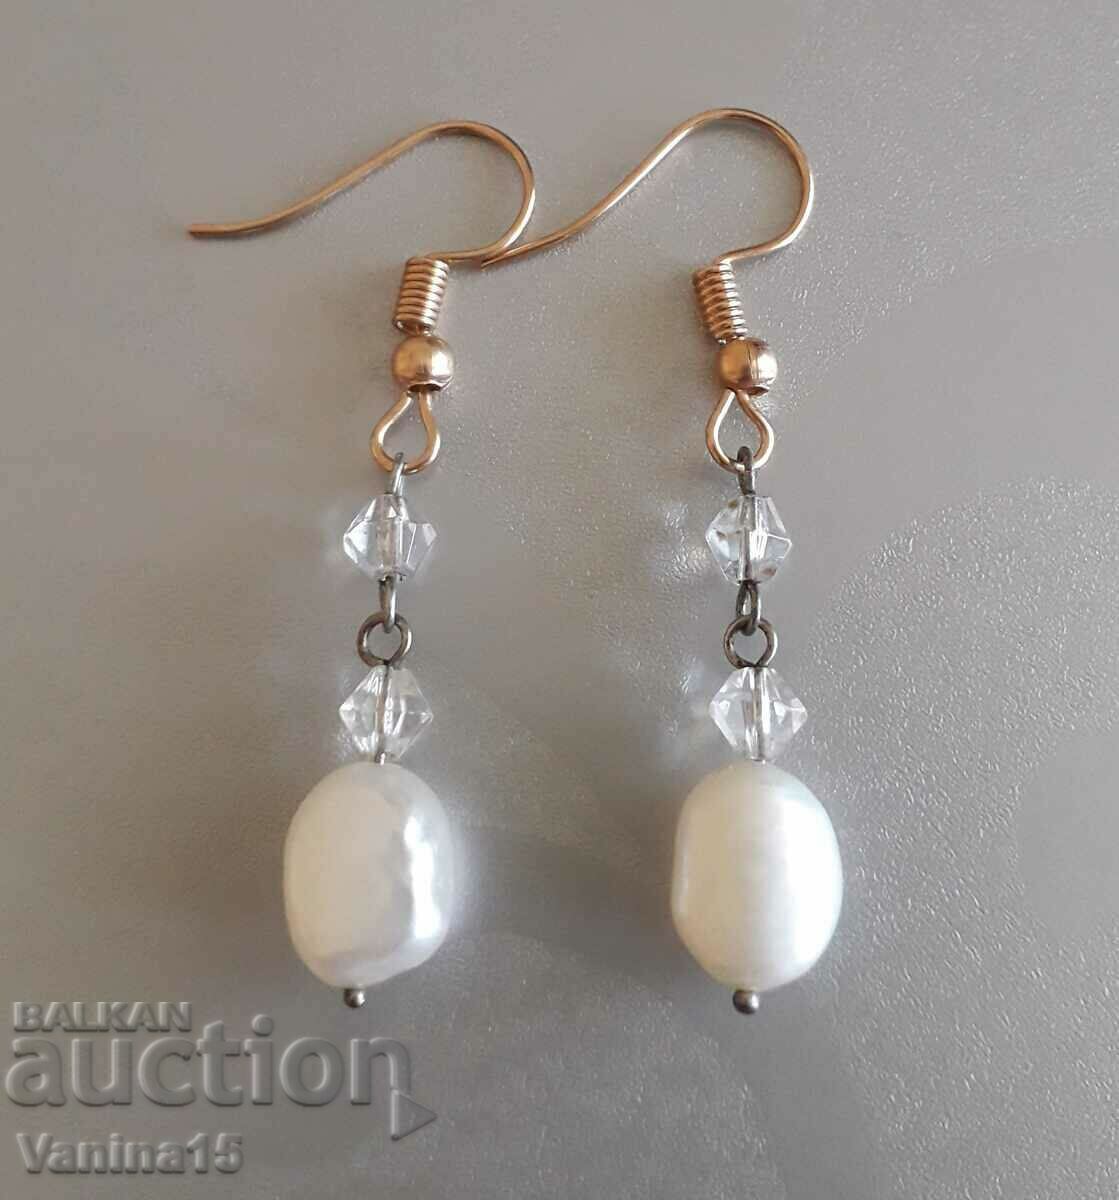 Imported earrings with natural pearls